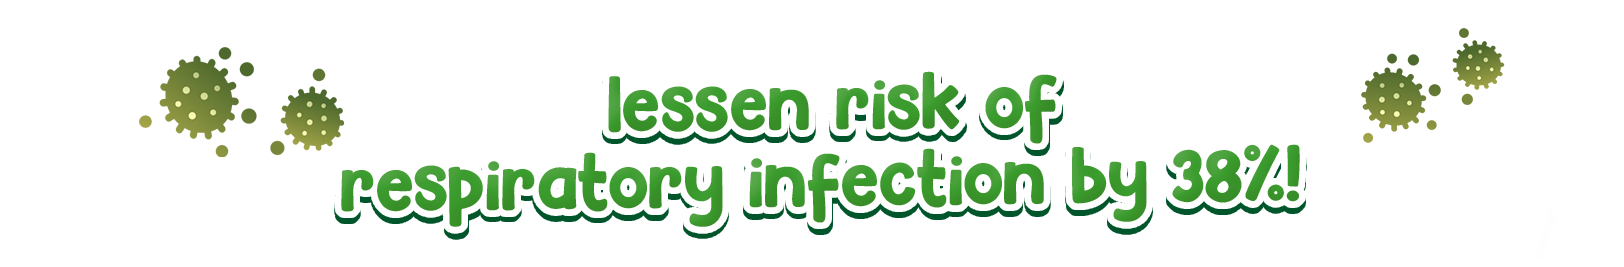 Lessen risk of respiratory infection by 38%